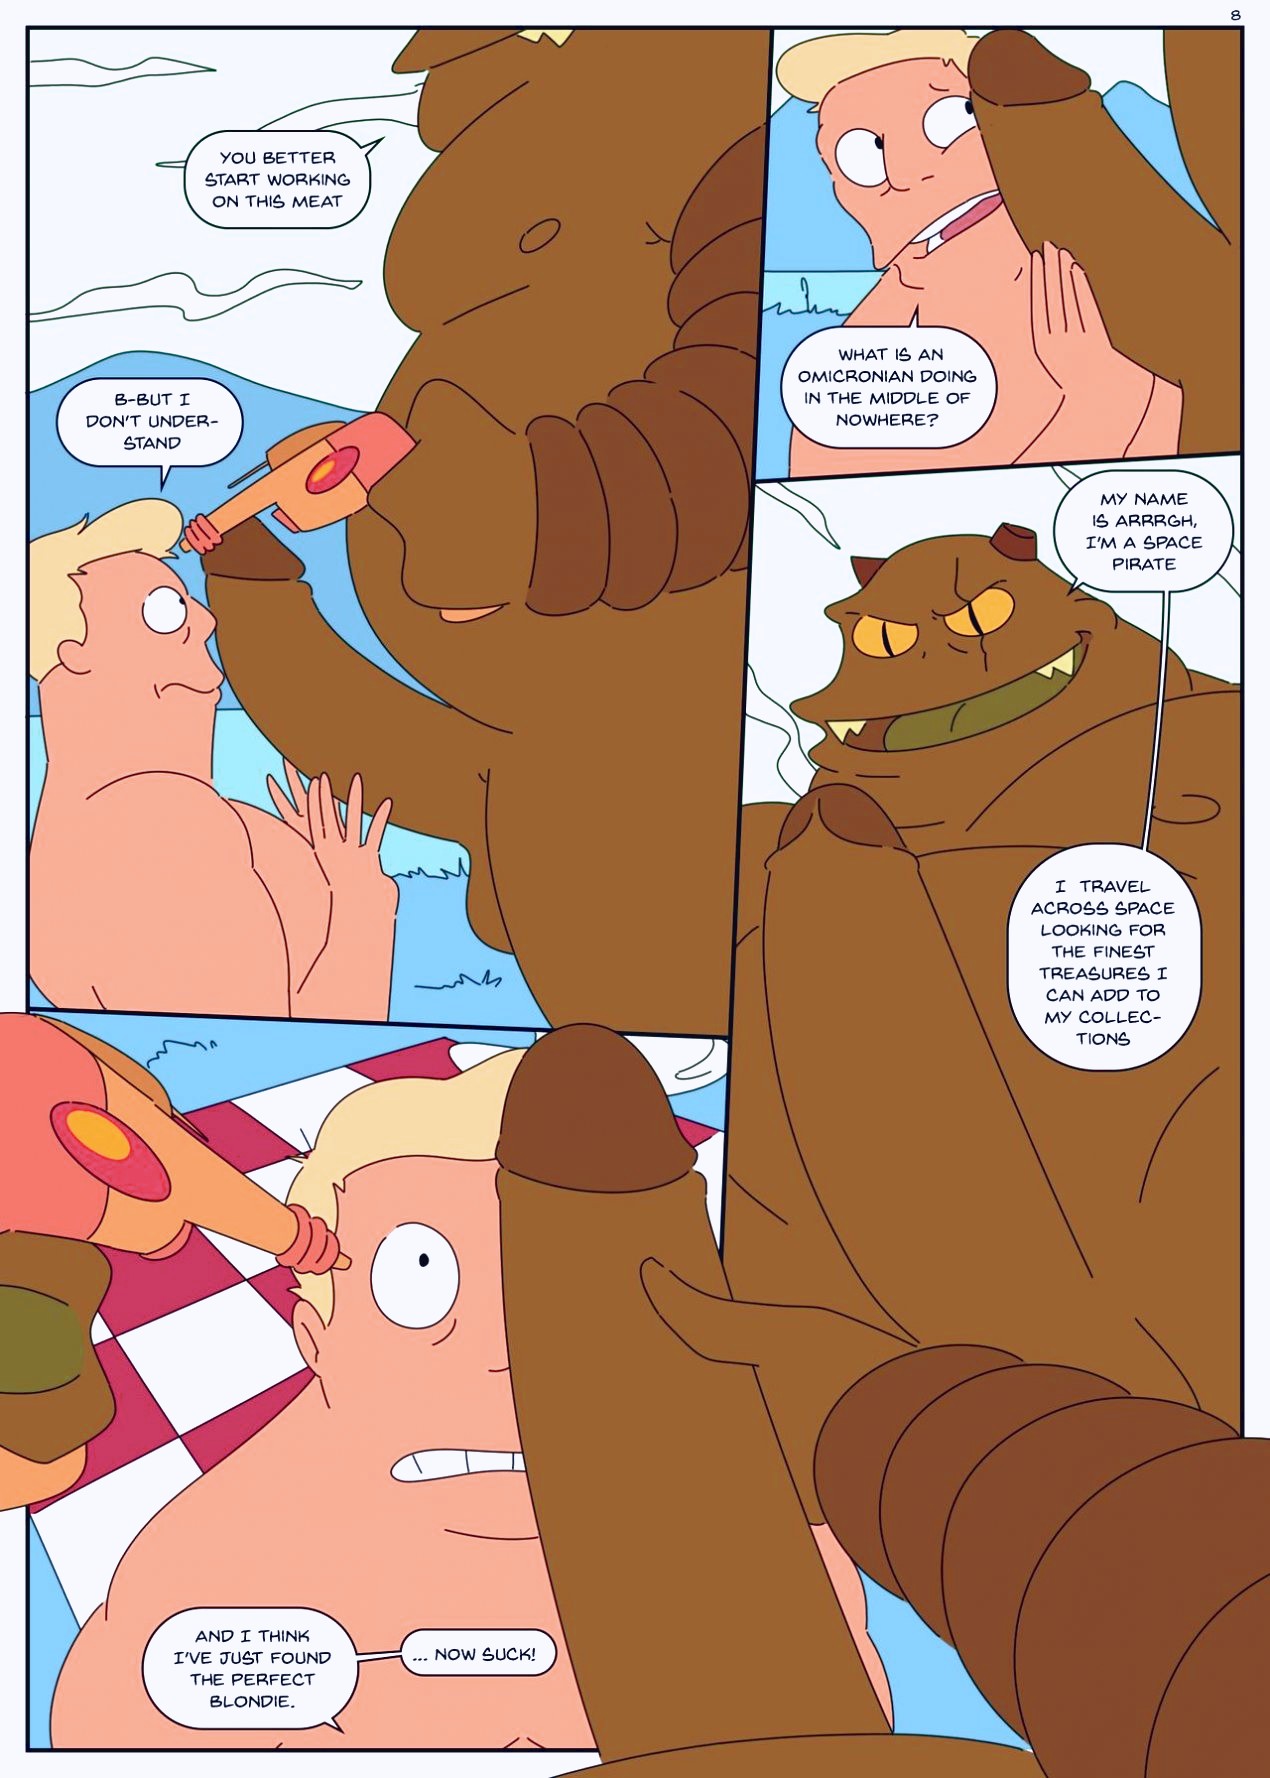 Zapp Brannigan & The Misterious Omicronian page 09